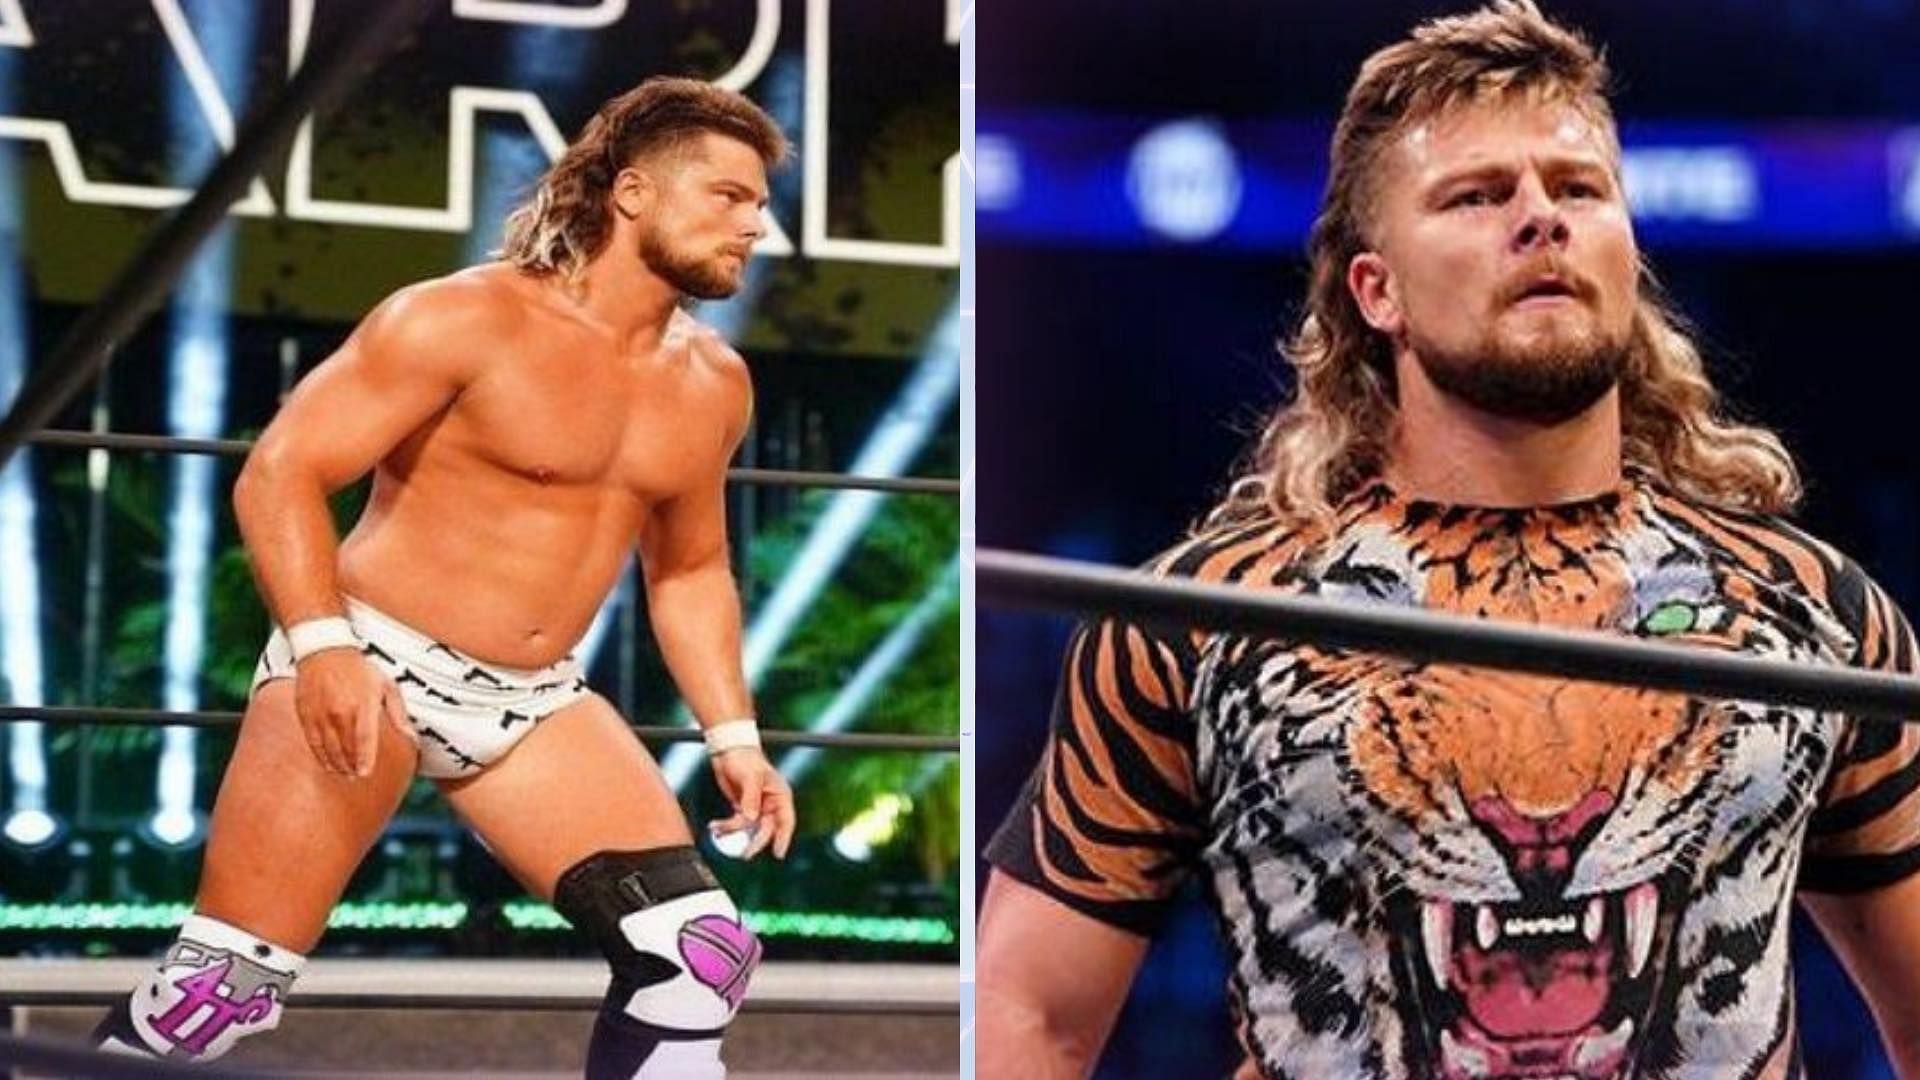 Brian Pillman Jr. is seemingly set to debut for WWE